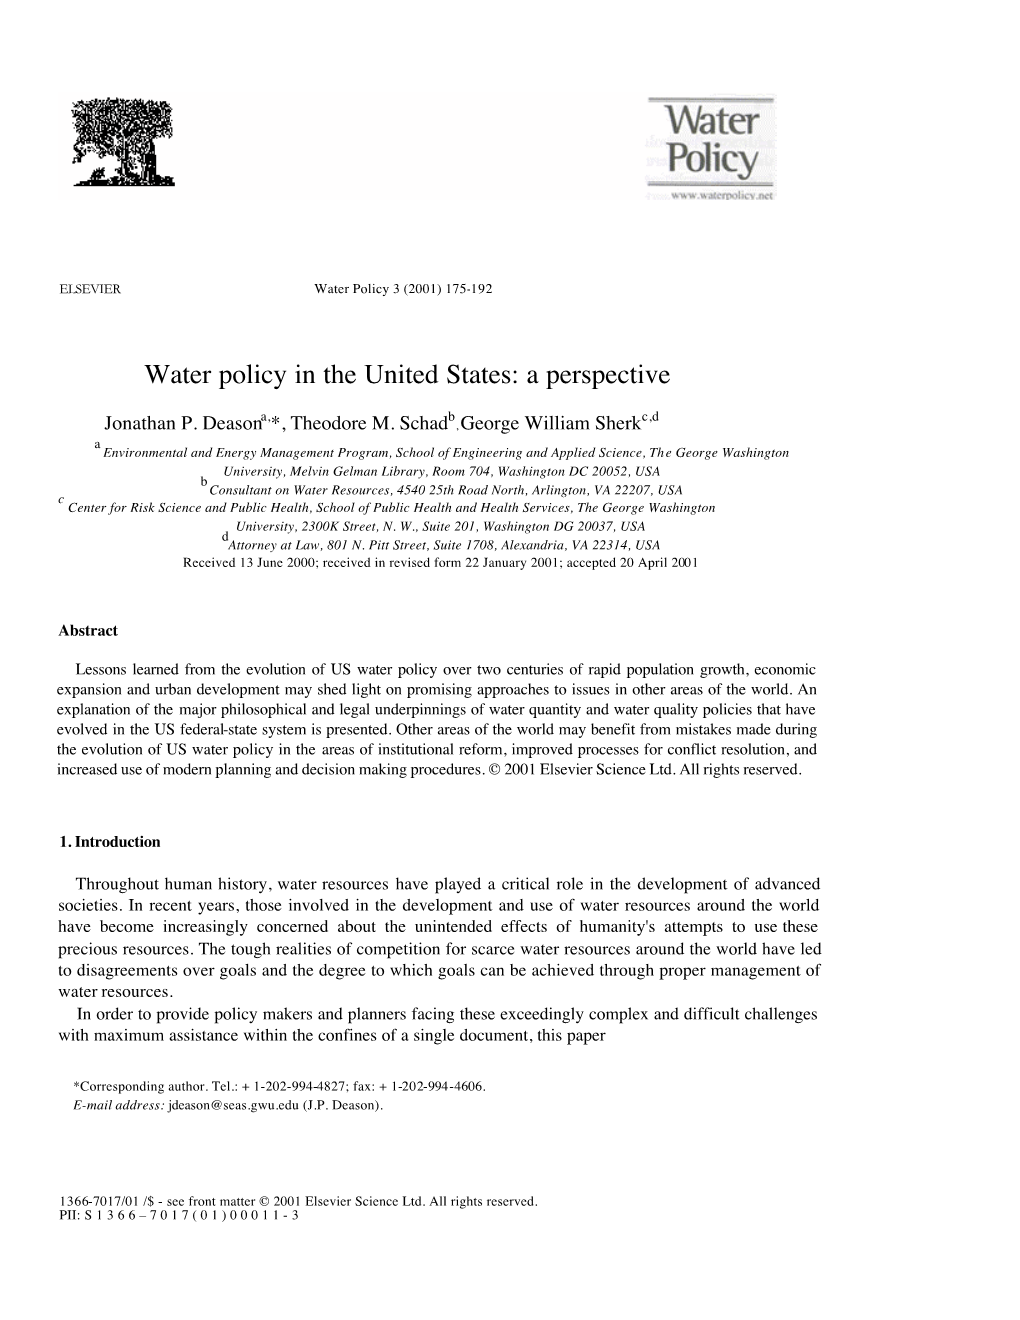 Water Policy in the United States: a Perspective